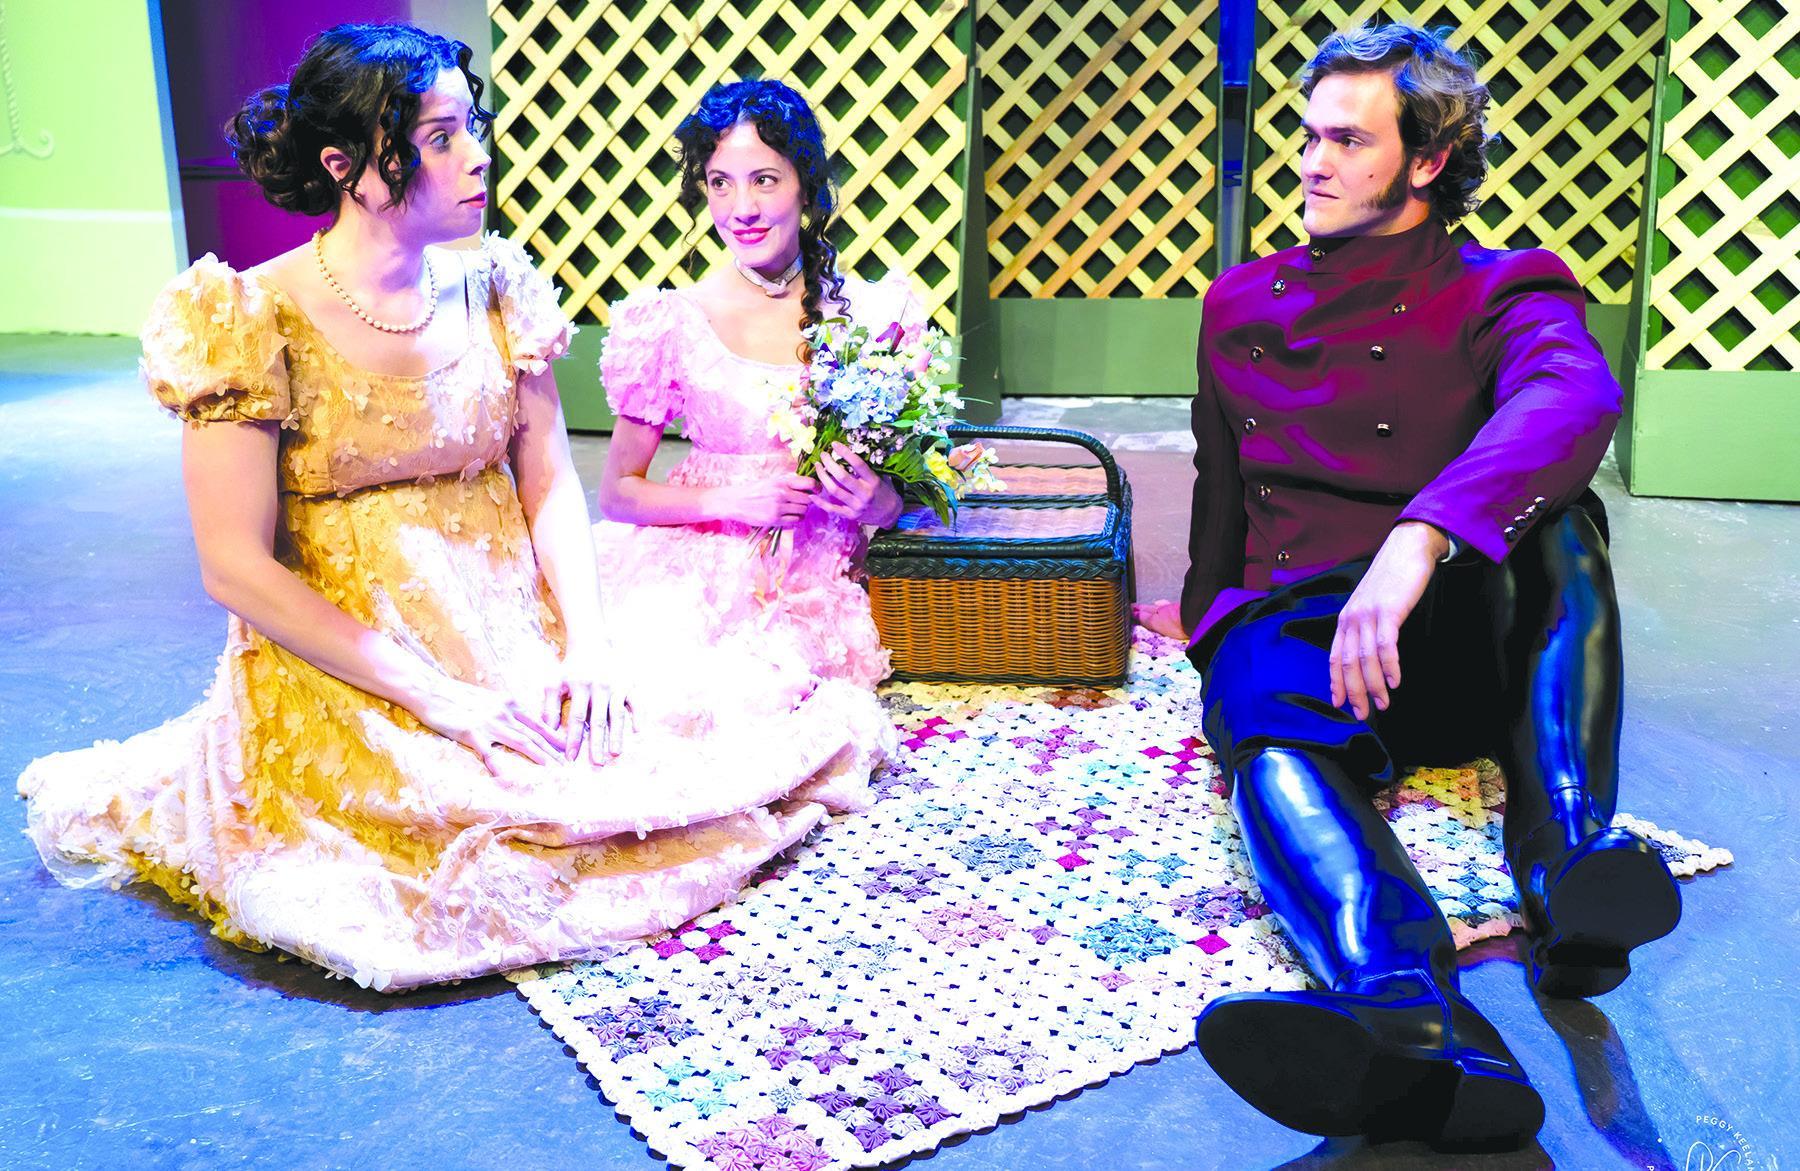 Jane Austen comes to Wimberley Players